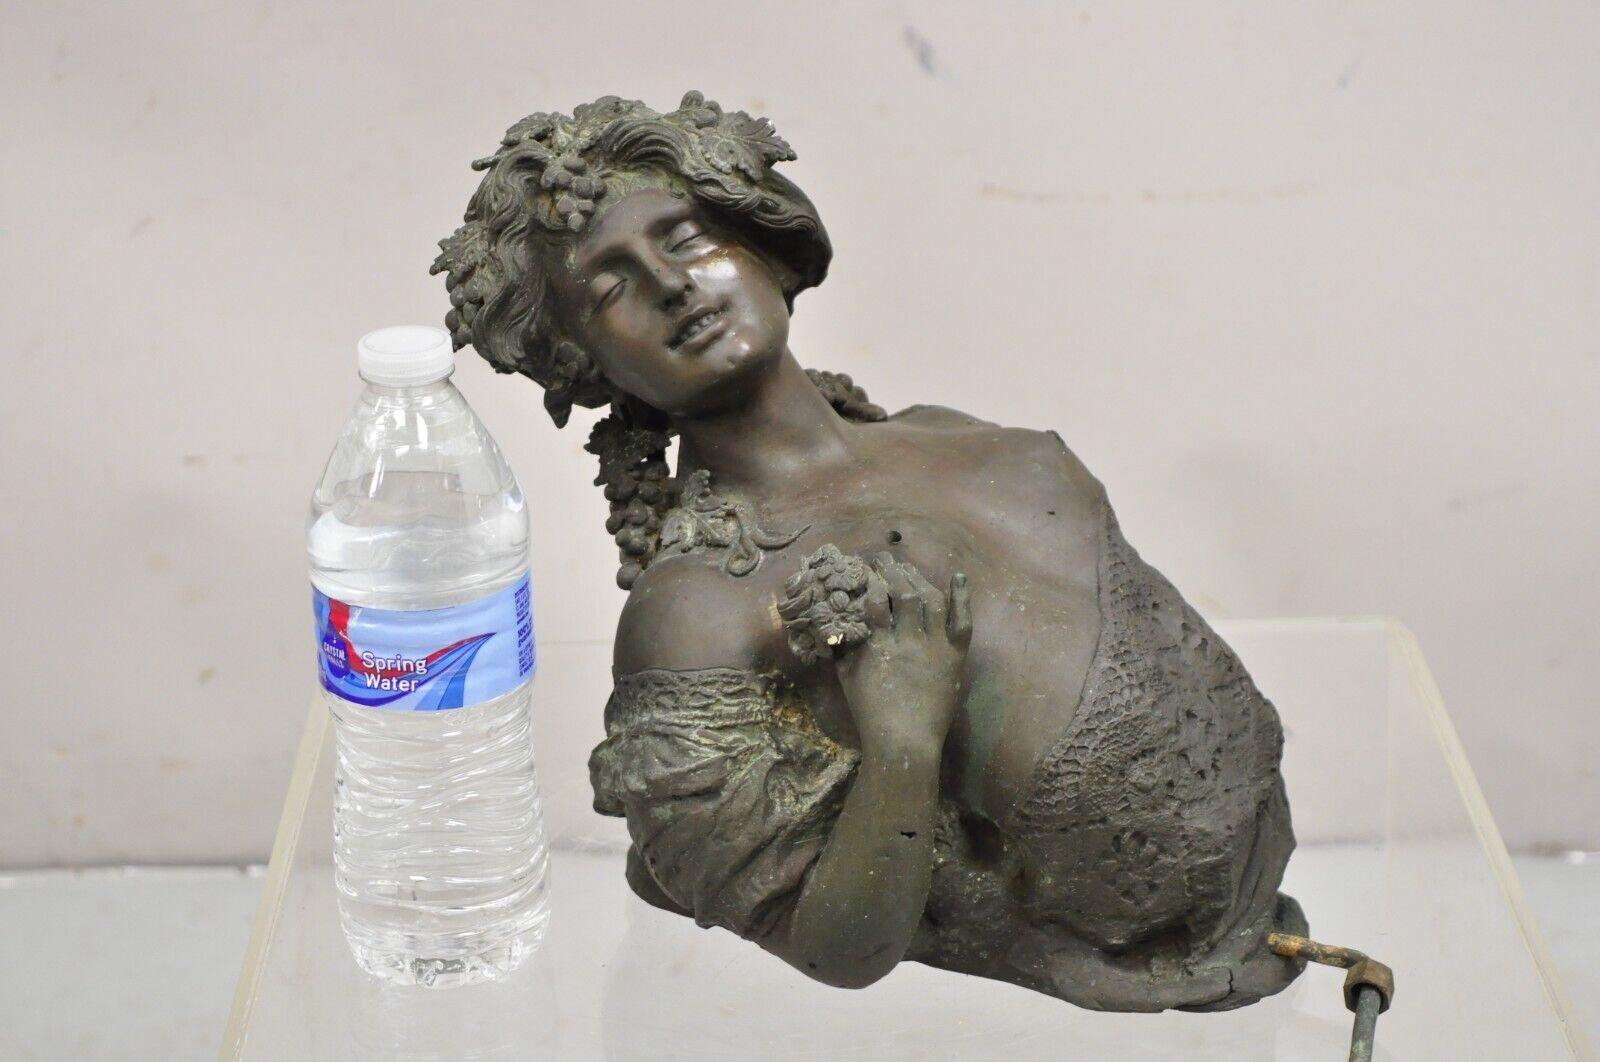 Antique French Victorian Bronze Female Bust Wall Mounted Garden Water Fountain Architectural Element. Item features holes to woman's bosoms' for water flow (have not seen the piece in use nor tested), nice bronze casting, unique antique item. Circa